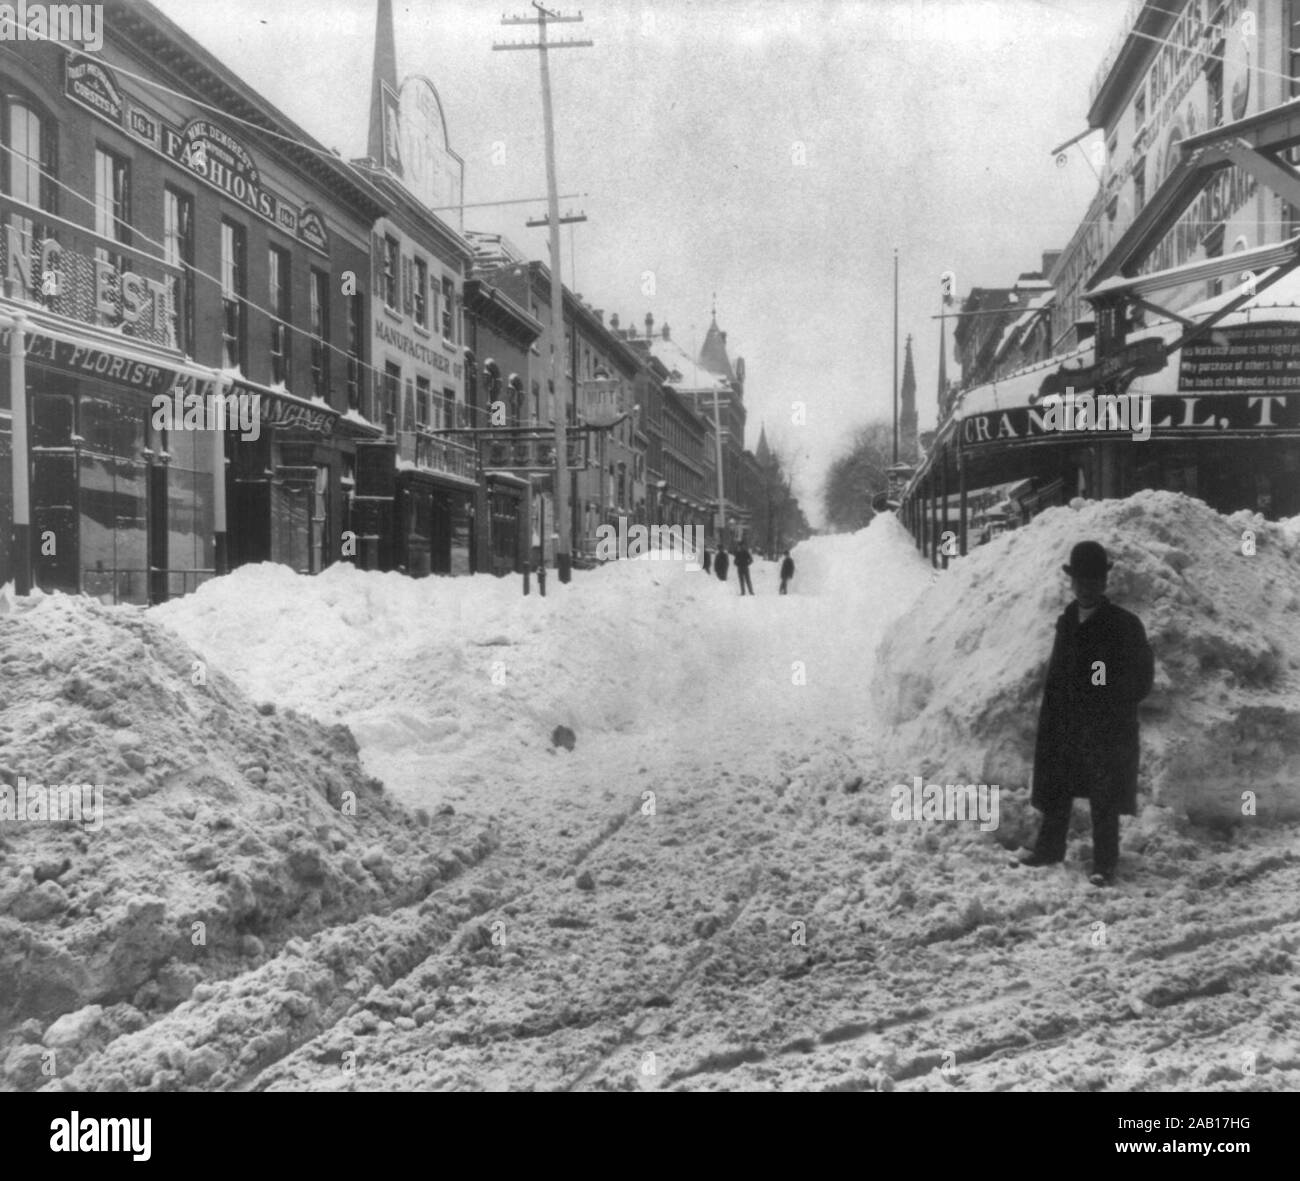 New York City after blizzard in 1888. Pierpont St. from Fulton Stock Photo